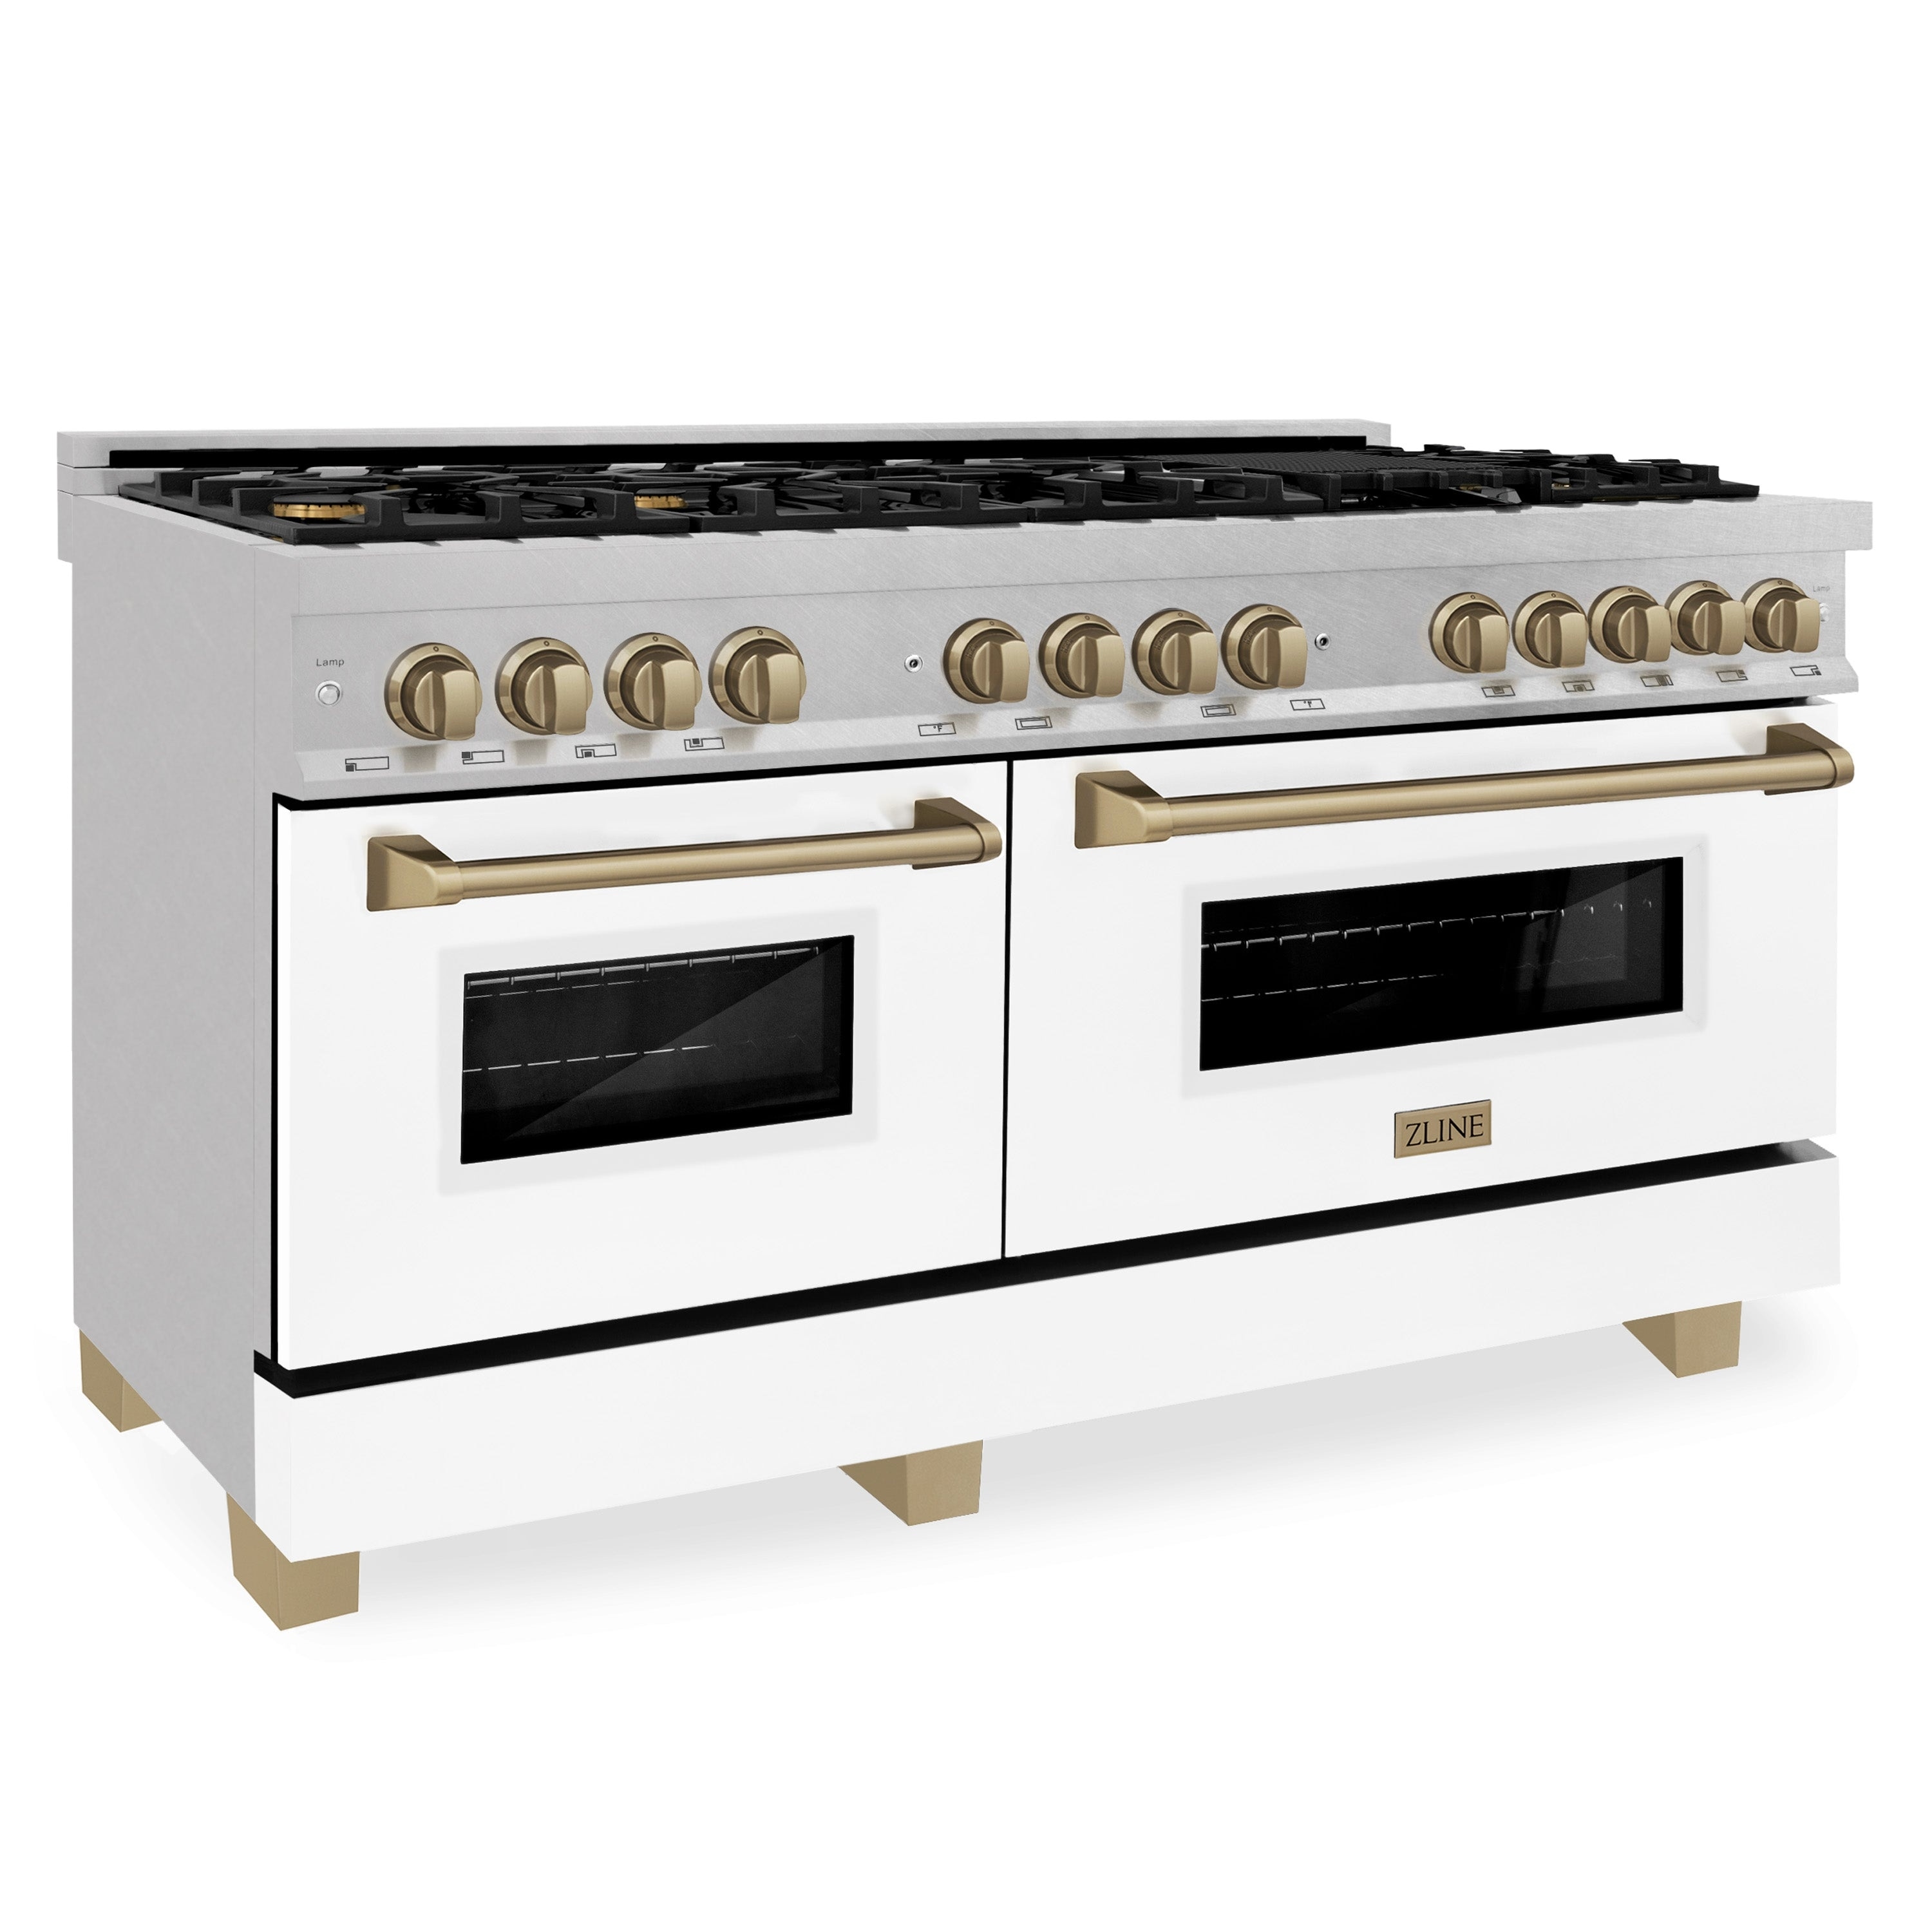 Zline Kitchen and Bath 60" 7.4 cu. ft. Dual Fuel Range with Gas Stove and Electric Oven in Fingerprint Resistant Stainless Steel with White Matte Door